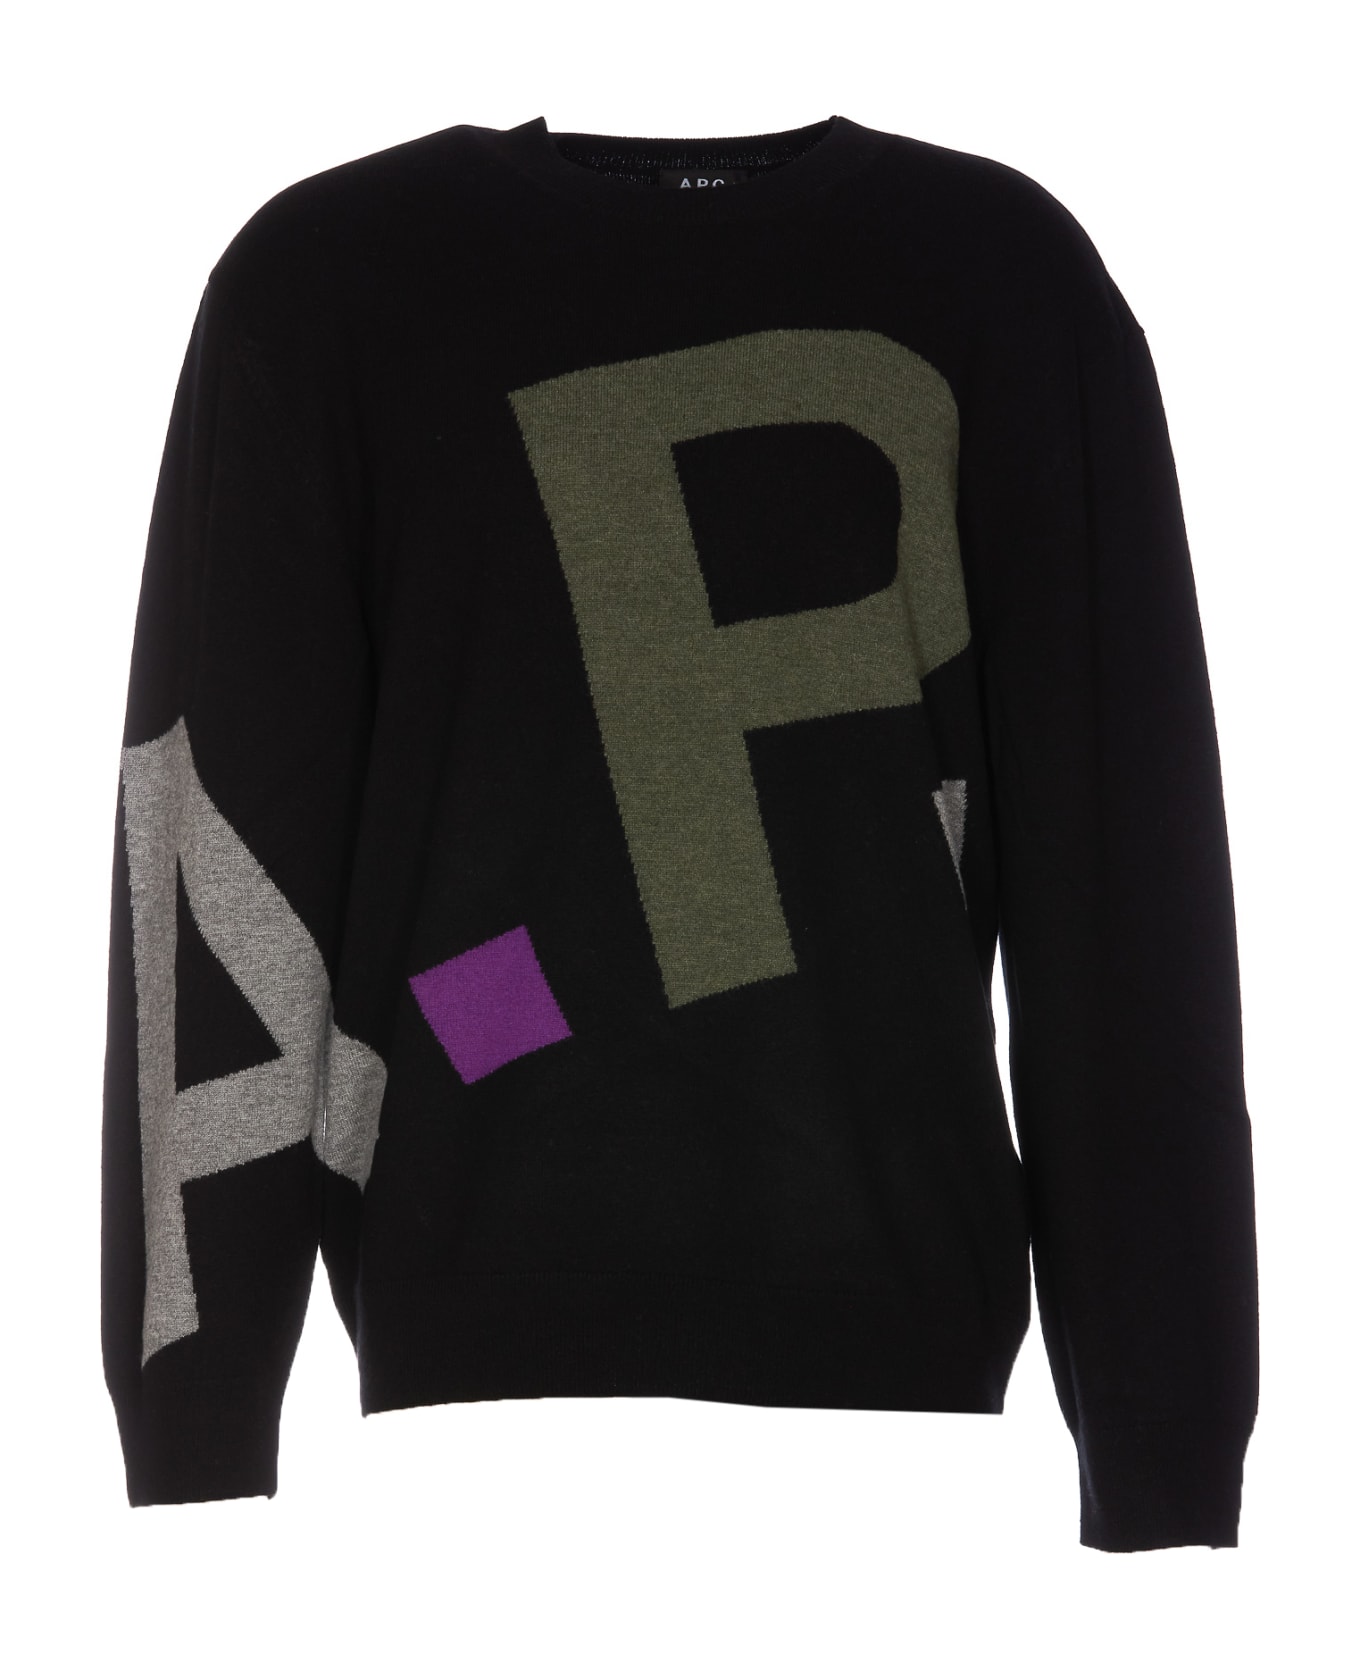 A.P.C. Logo All Over Sweater - Lzz Black フリース